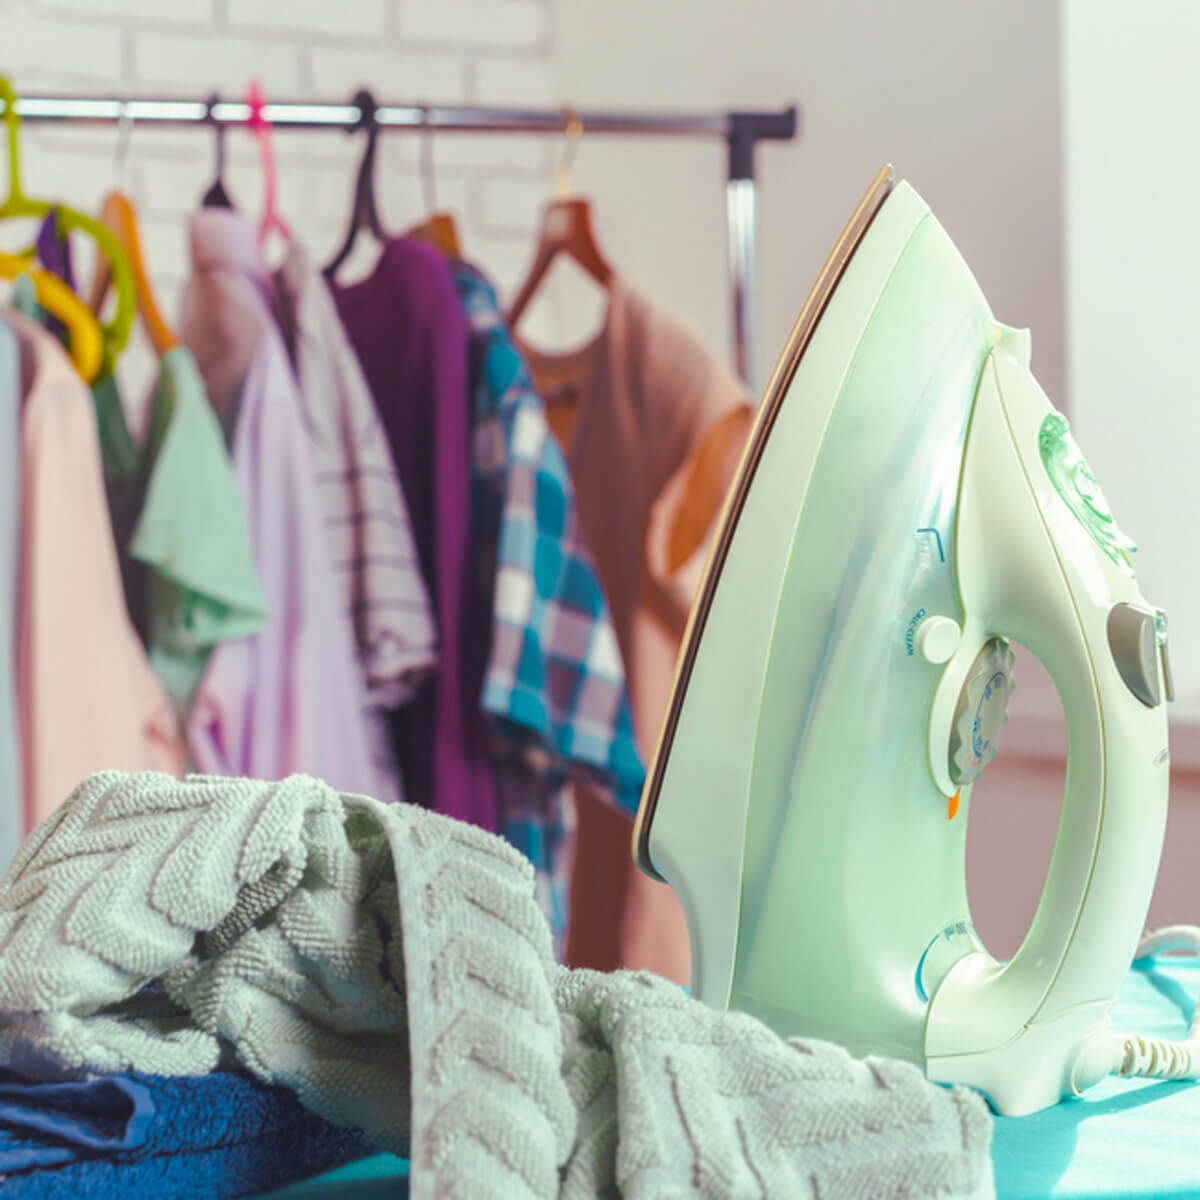 13 Laundry Tips on How to Wash Clothes